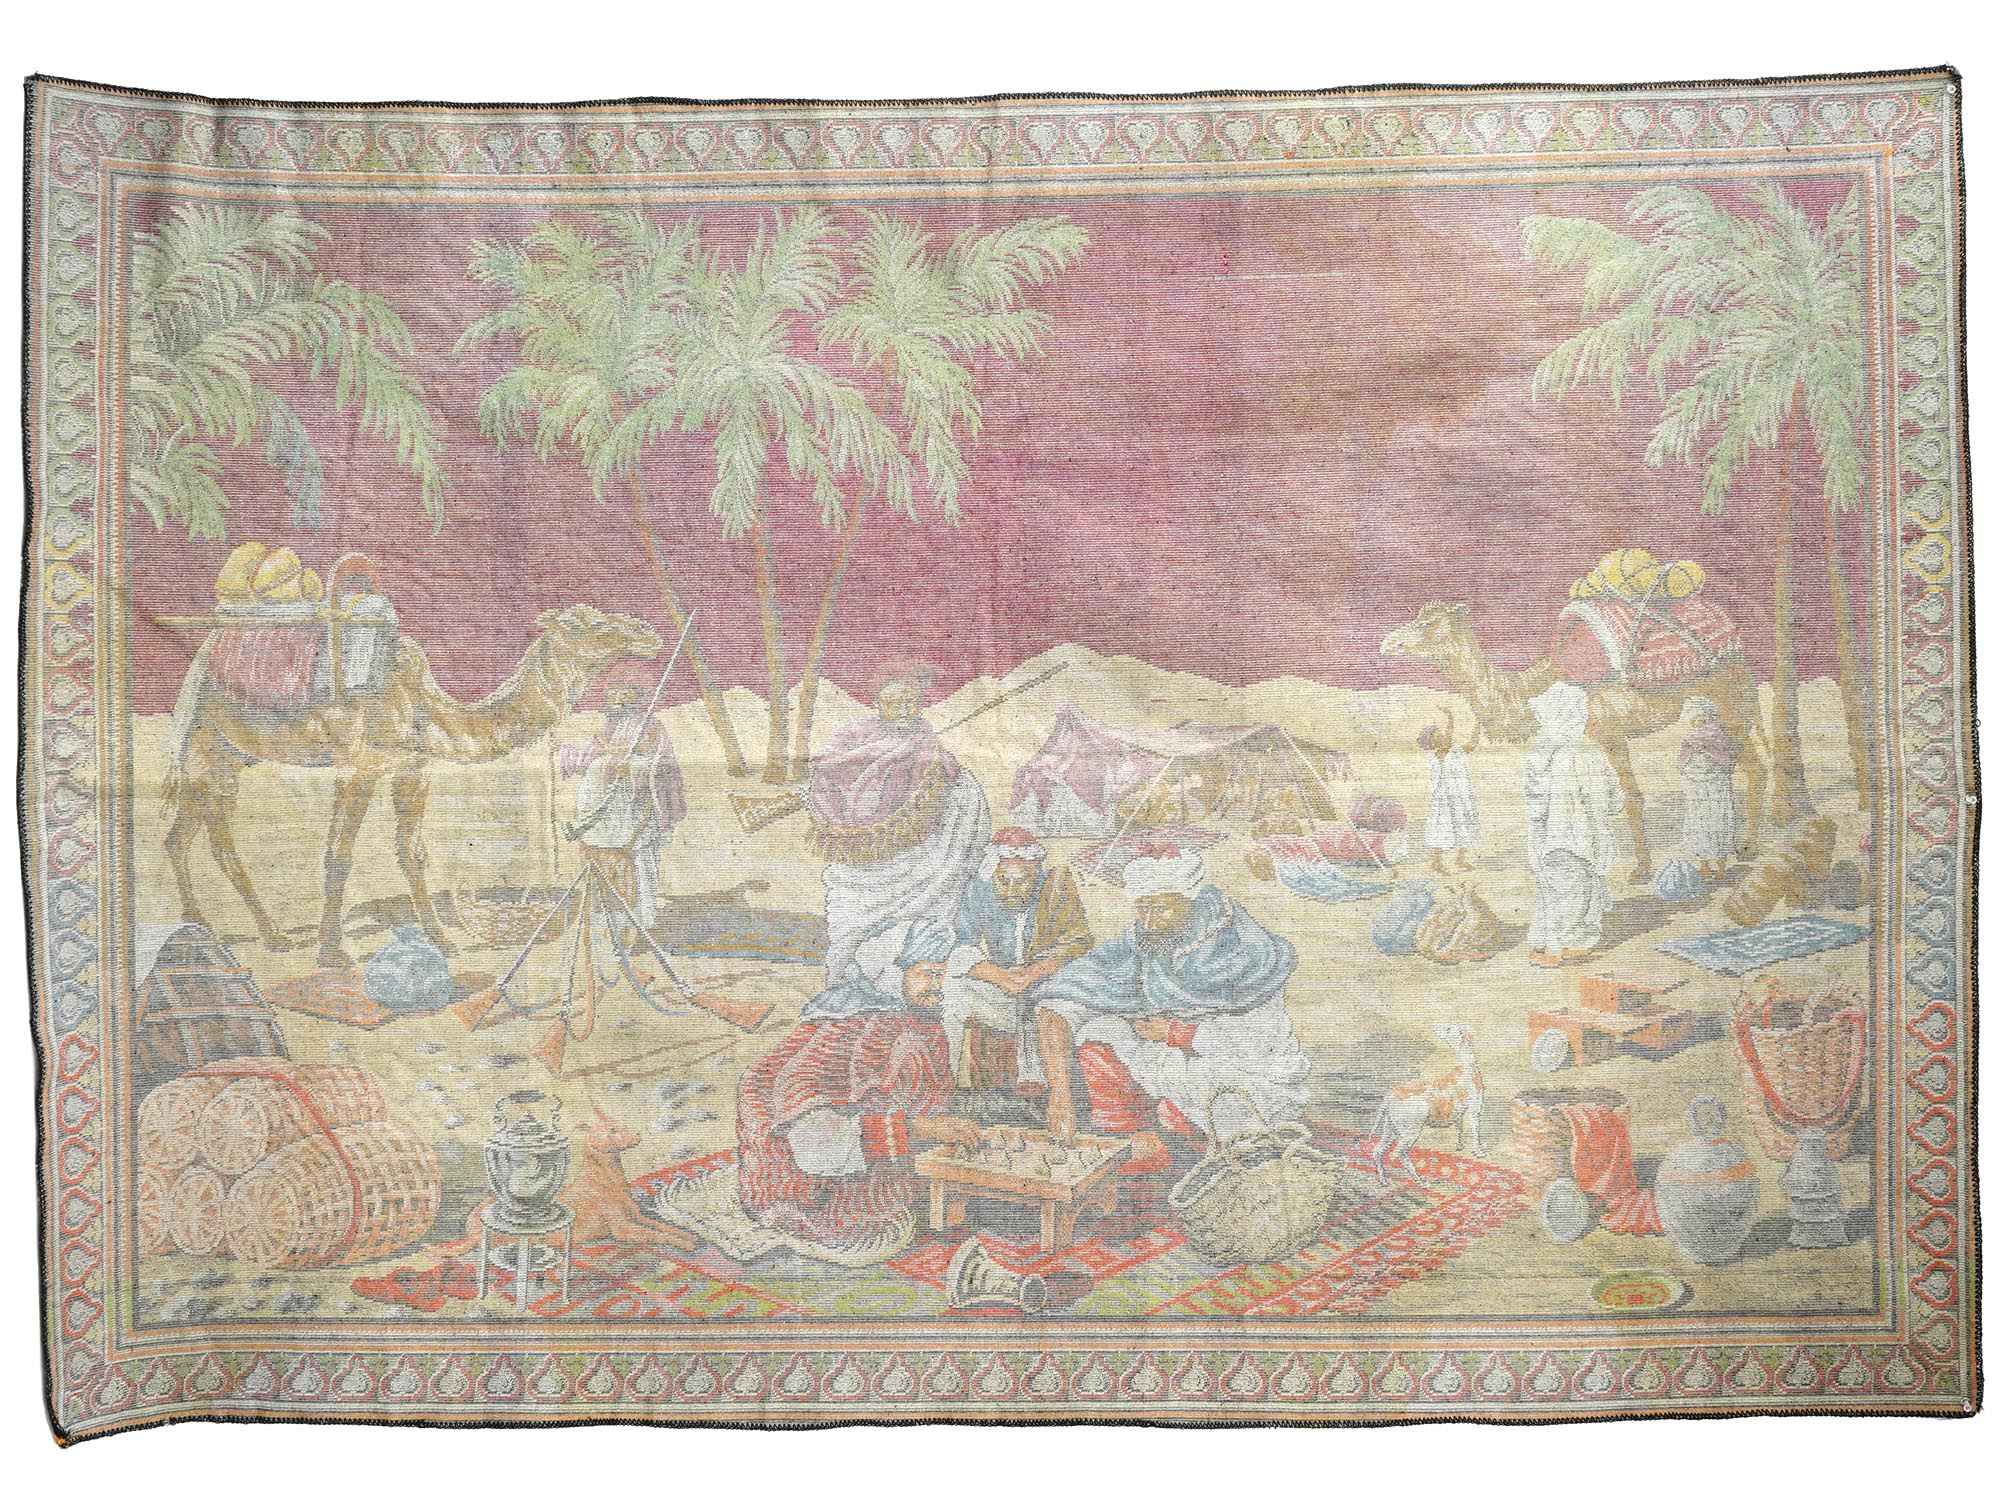 ANTIQUE MIDDLE EASTERN TAPESTRY WALL DECOR RUG PIC-1